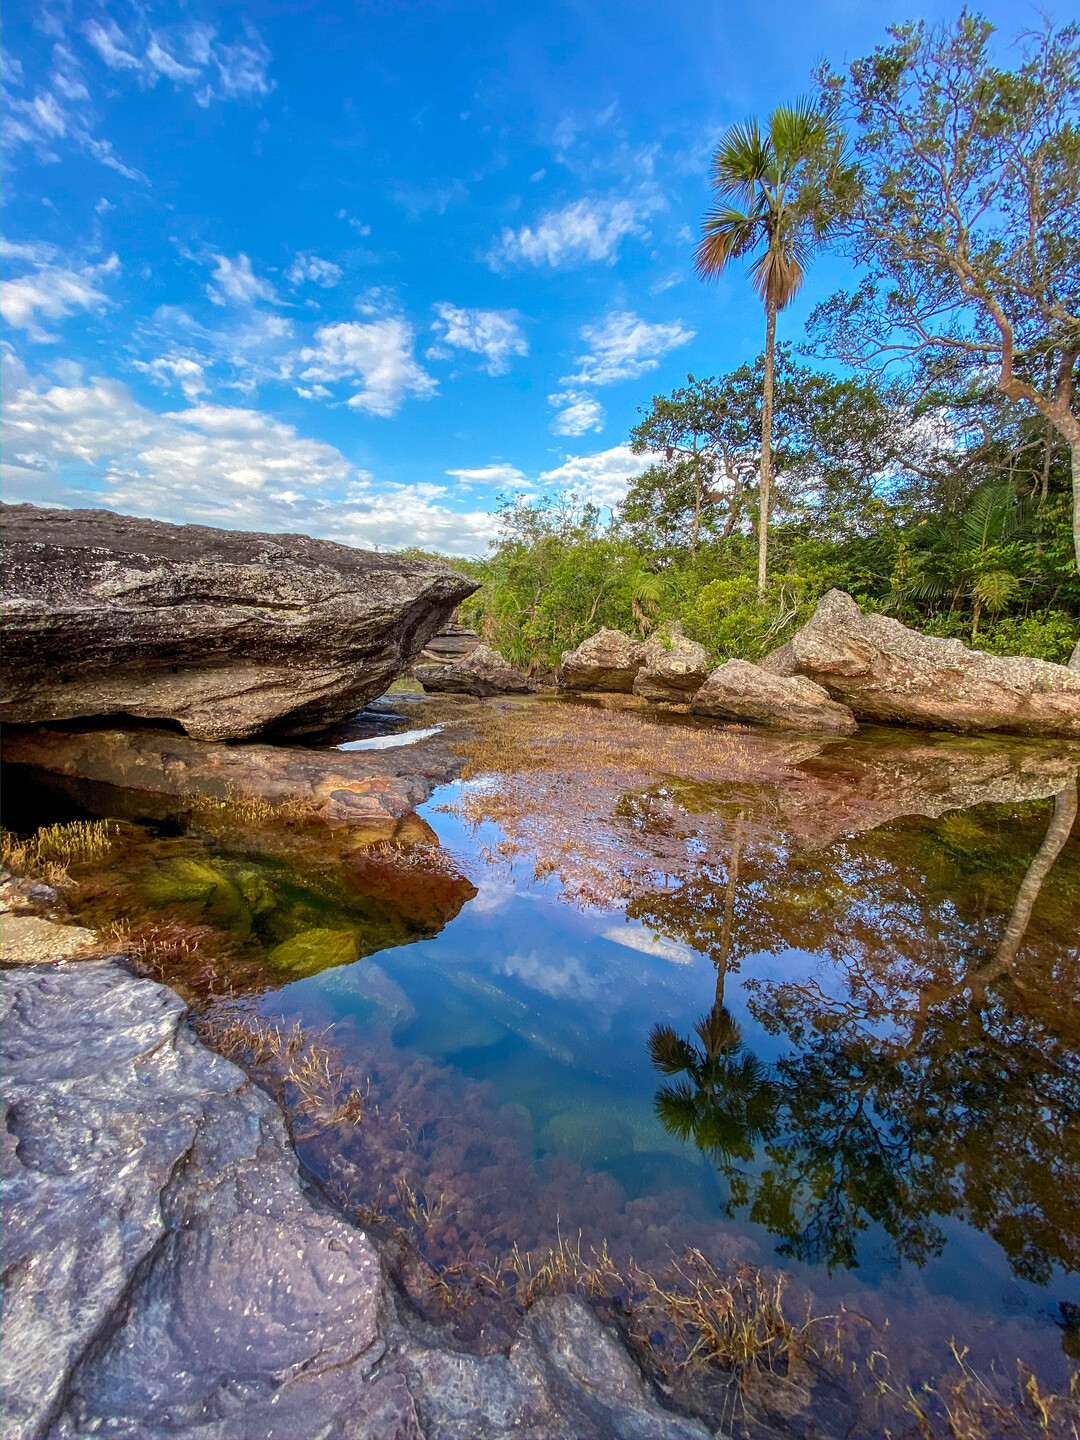 Caño Cristales 3-Day Tour with Flight Tickets